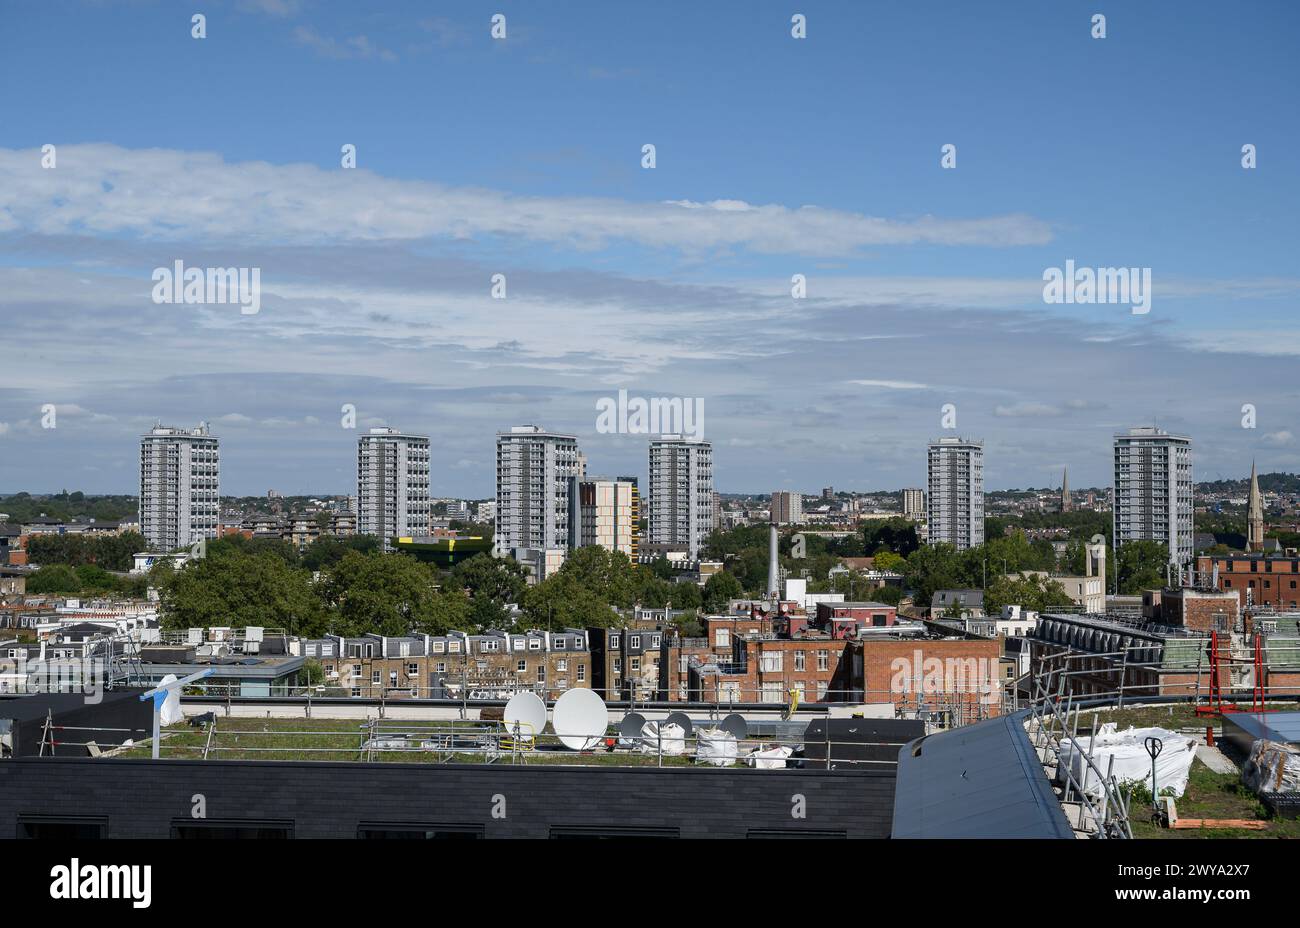 View of London skyline showing a series of tower blocks, London, England. Stock Photo